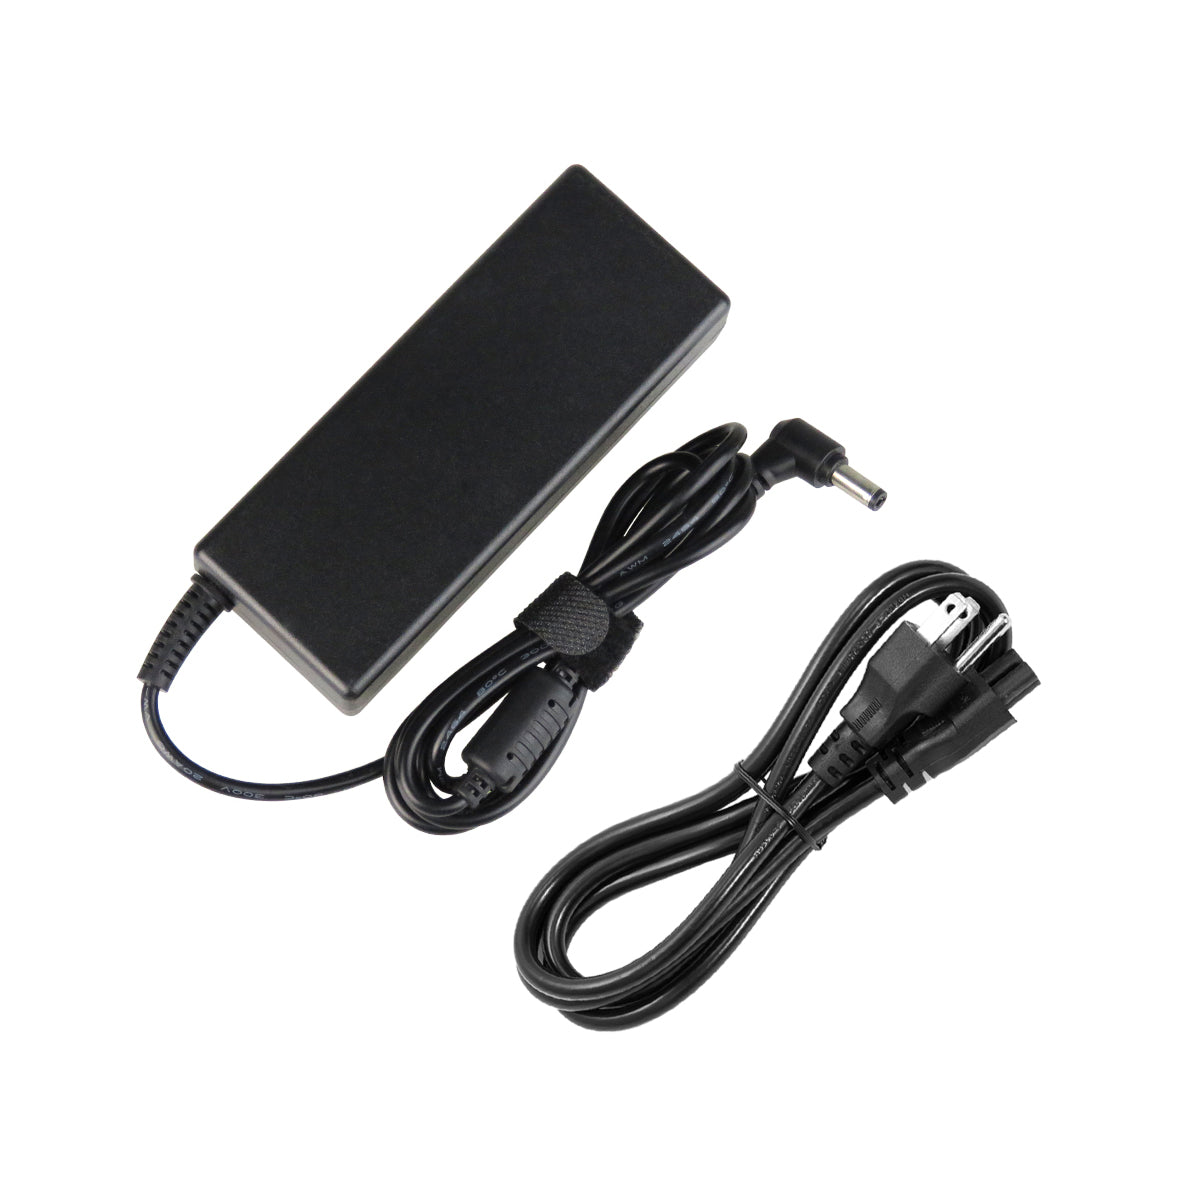 AC Adapter Charger for ASUS N52JV Notebook.